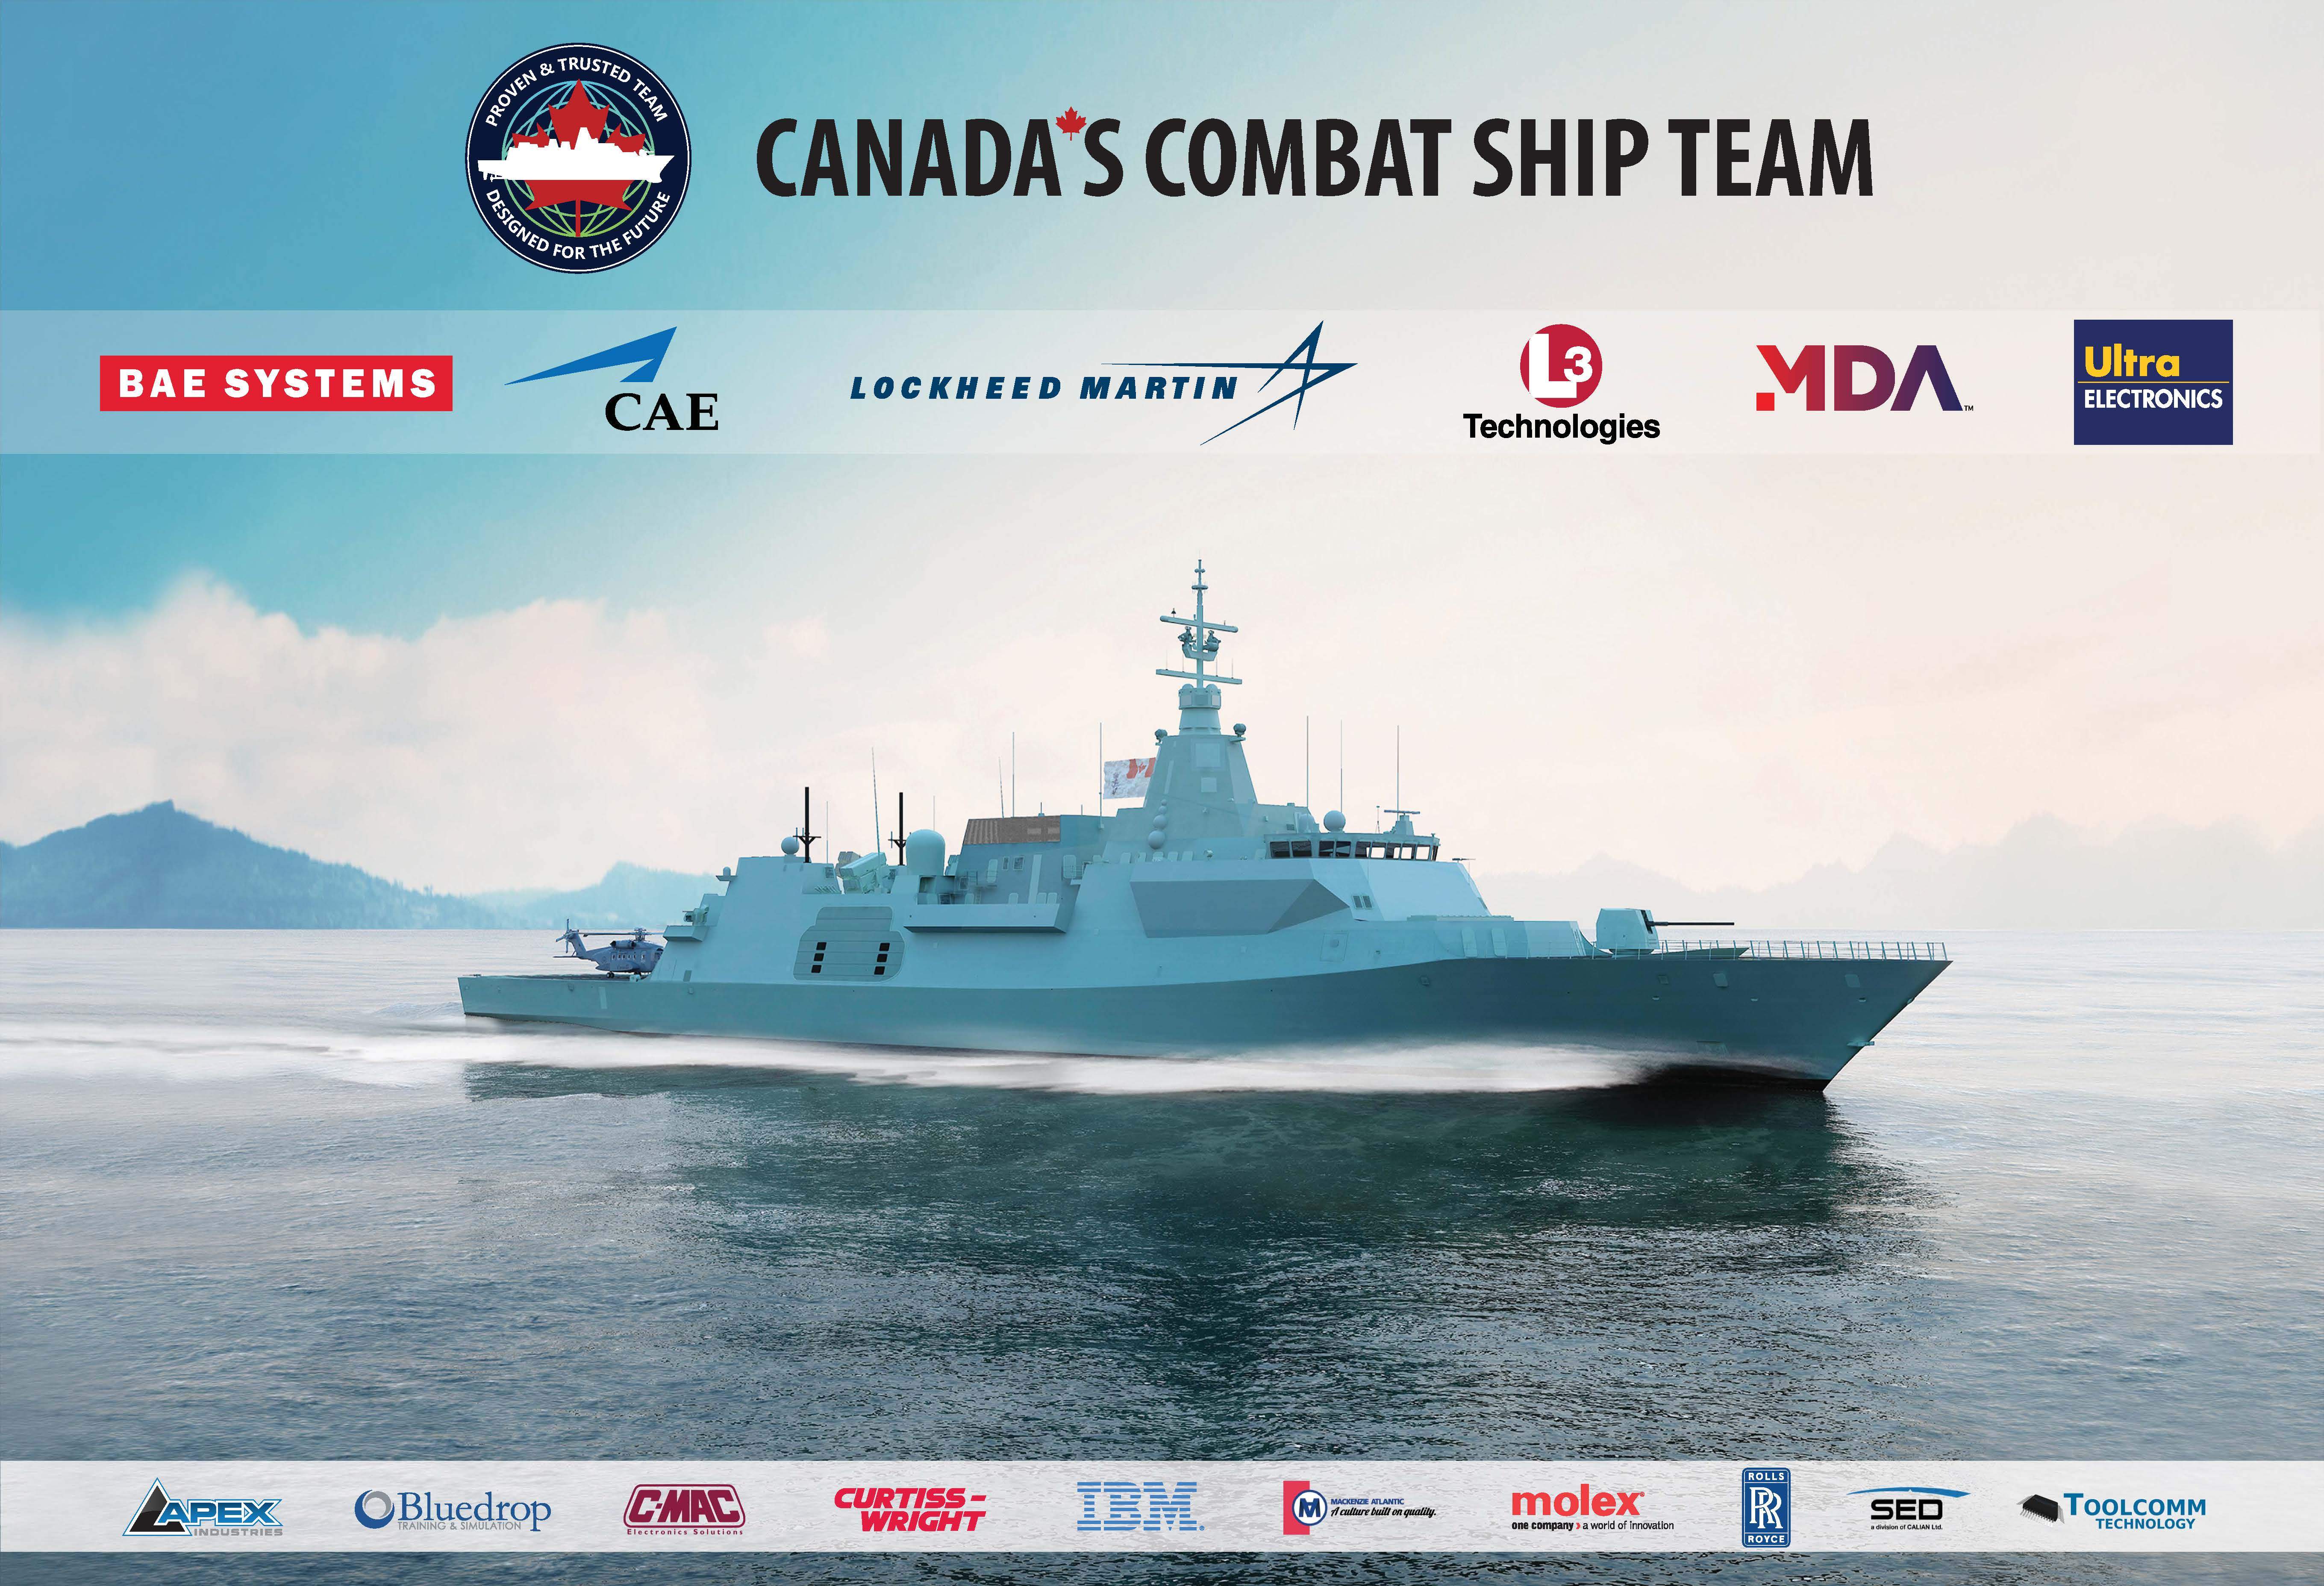 Cae To Begin Work On Design Phase Of Canadian Surface Combatant Ship